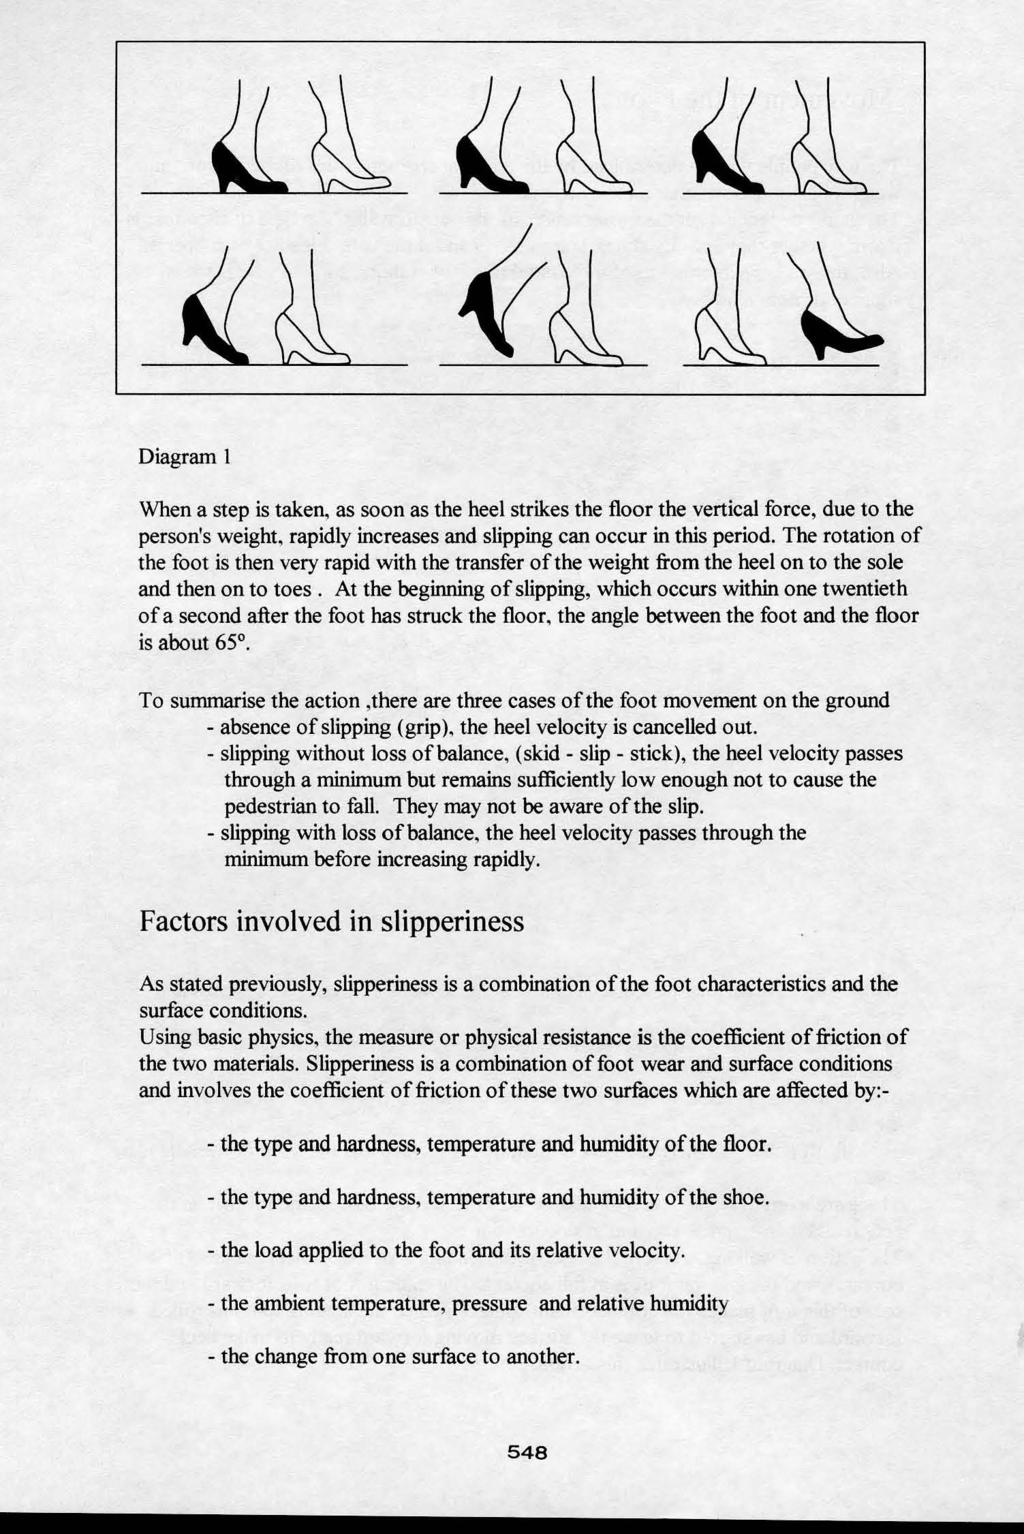 Diagram I When a step is taken, as soon as the heel strikes the floor the vertical force, due to the person's weight, rapidly increases and slipping can occur in this period.